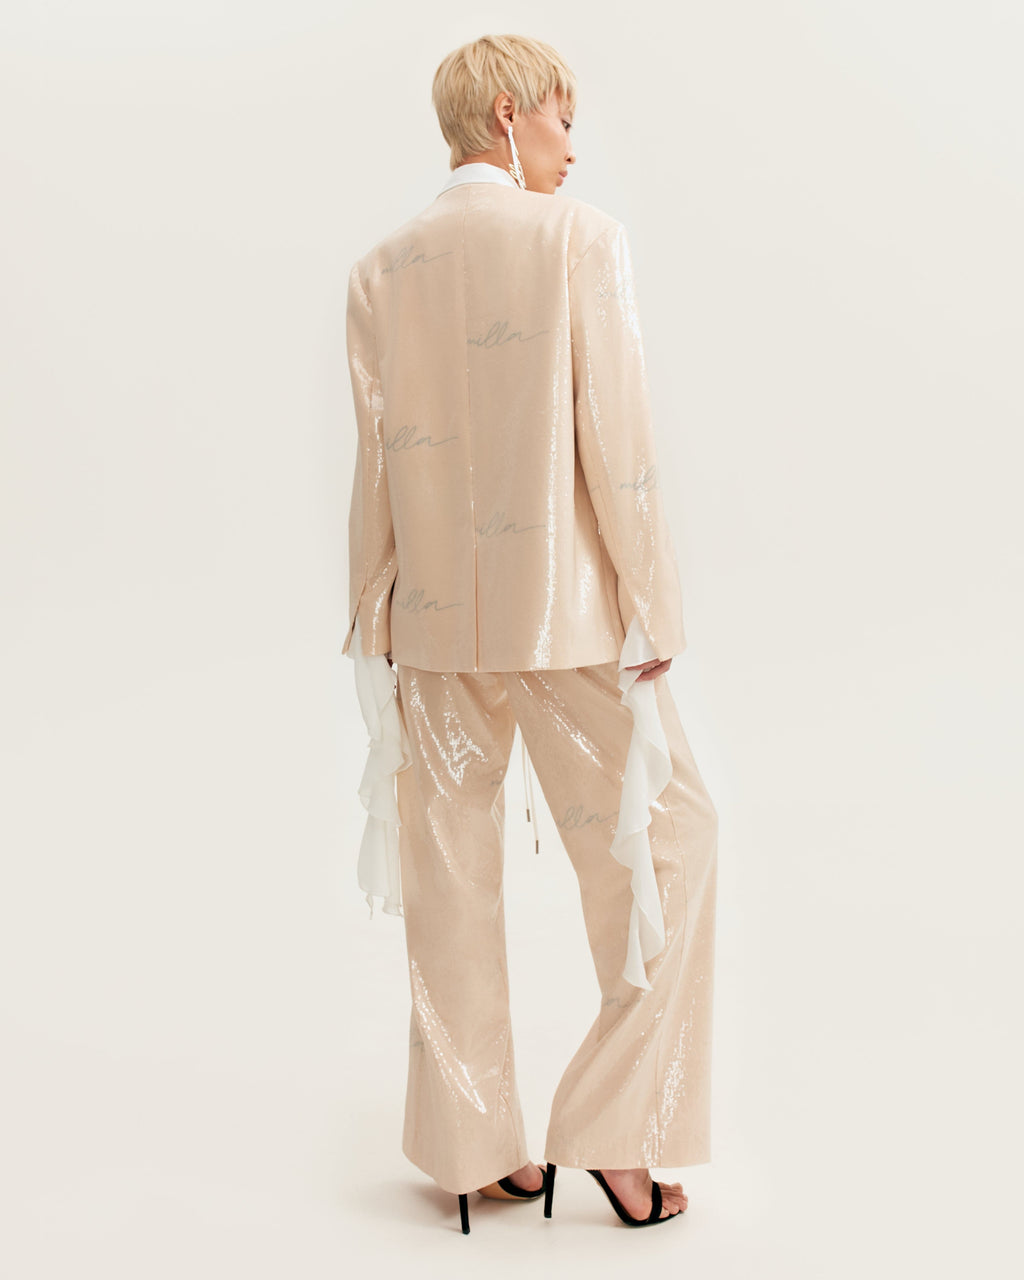 Sparkling beige trousers with Milla's signature, Xo Xo